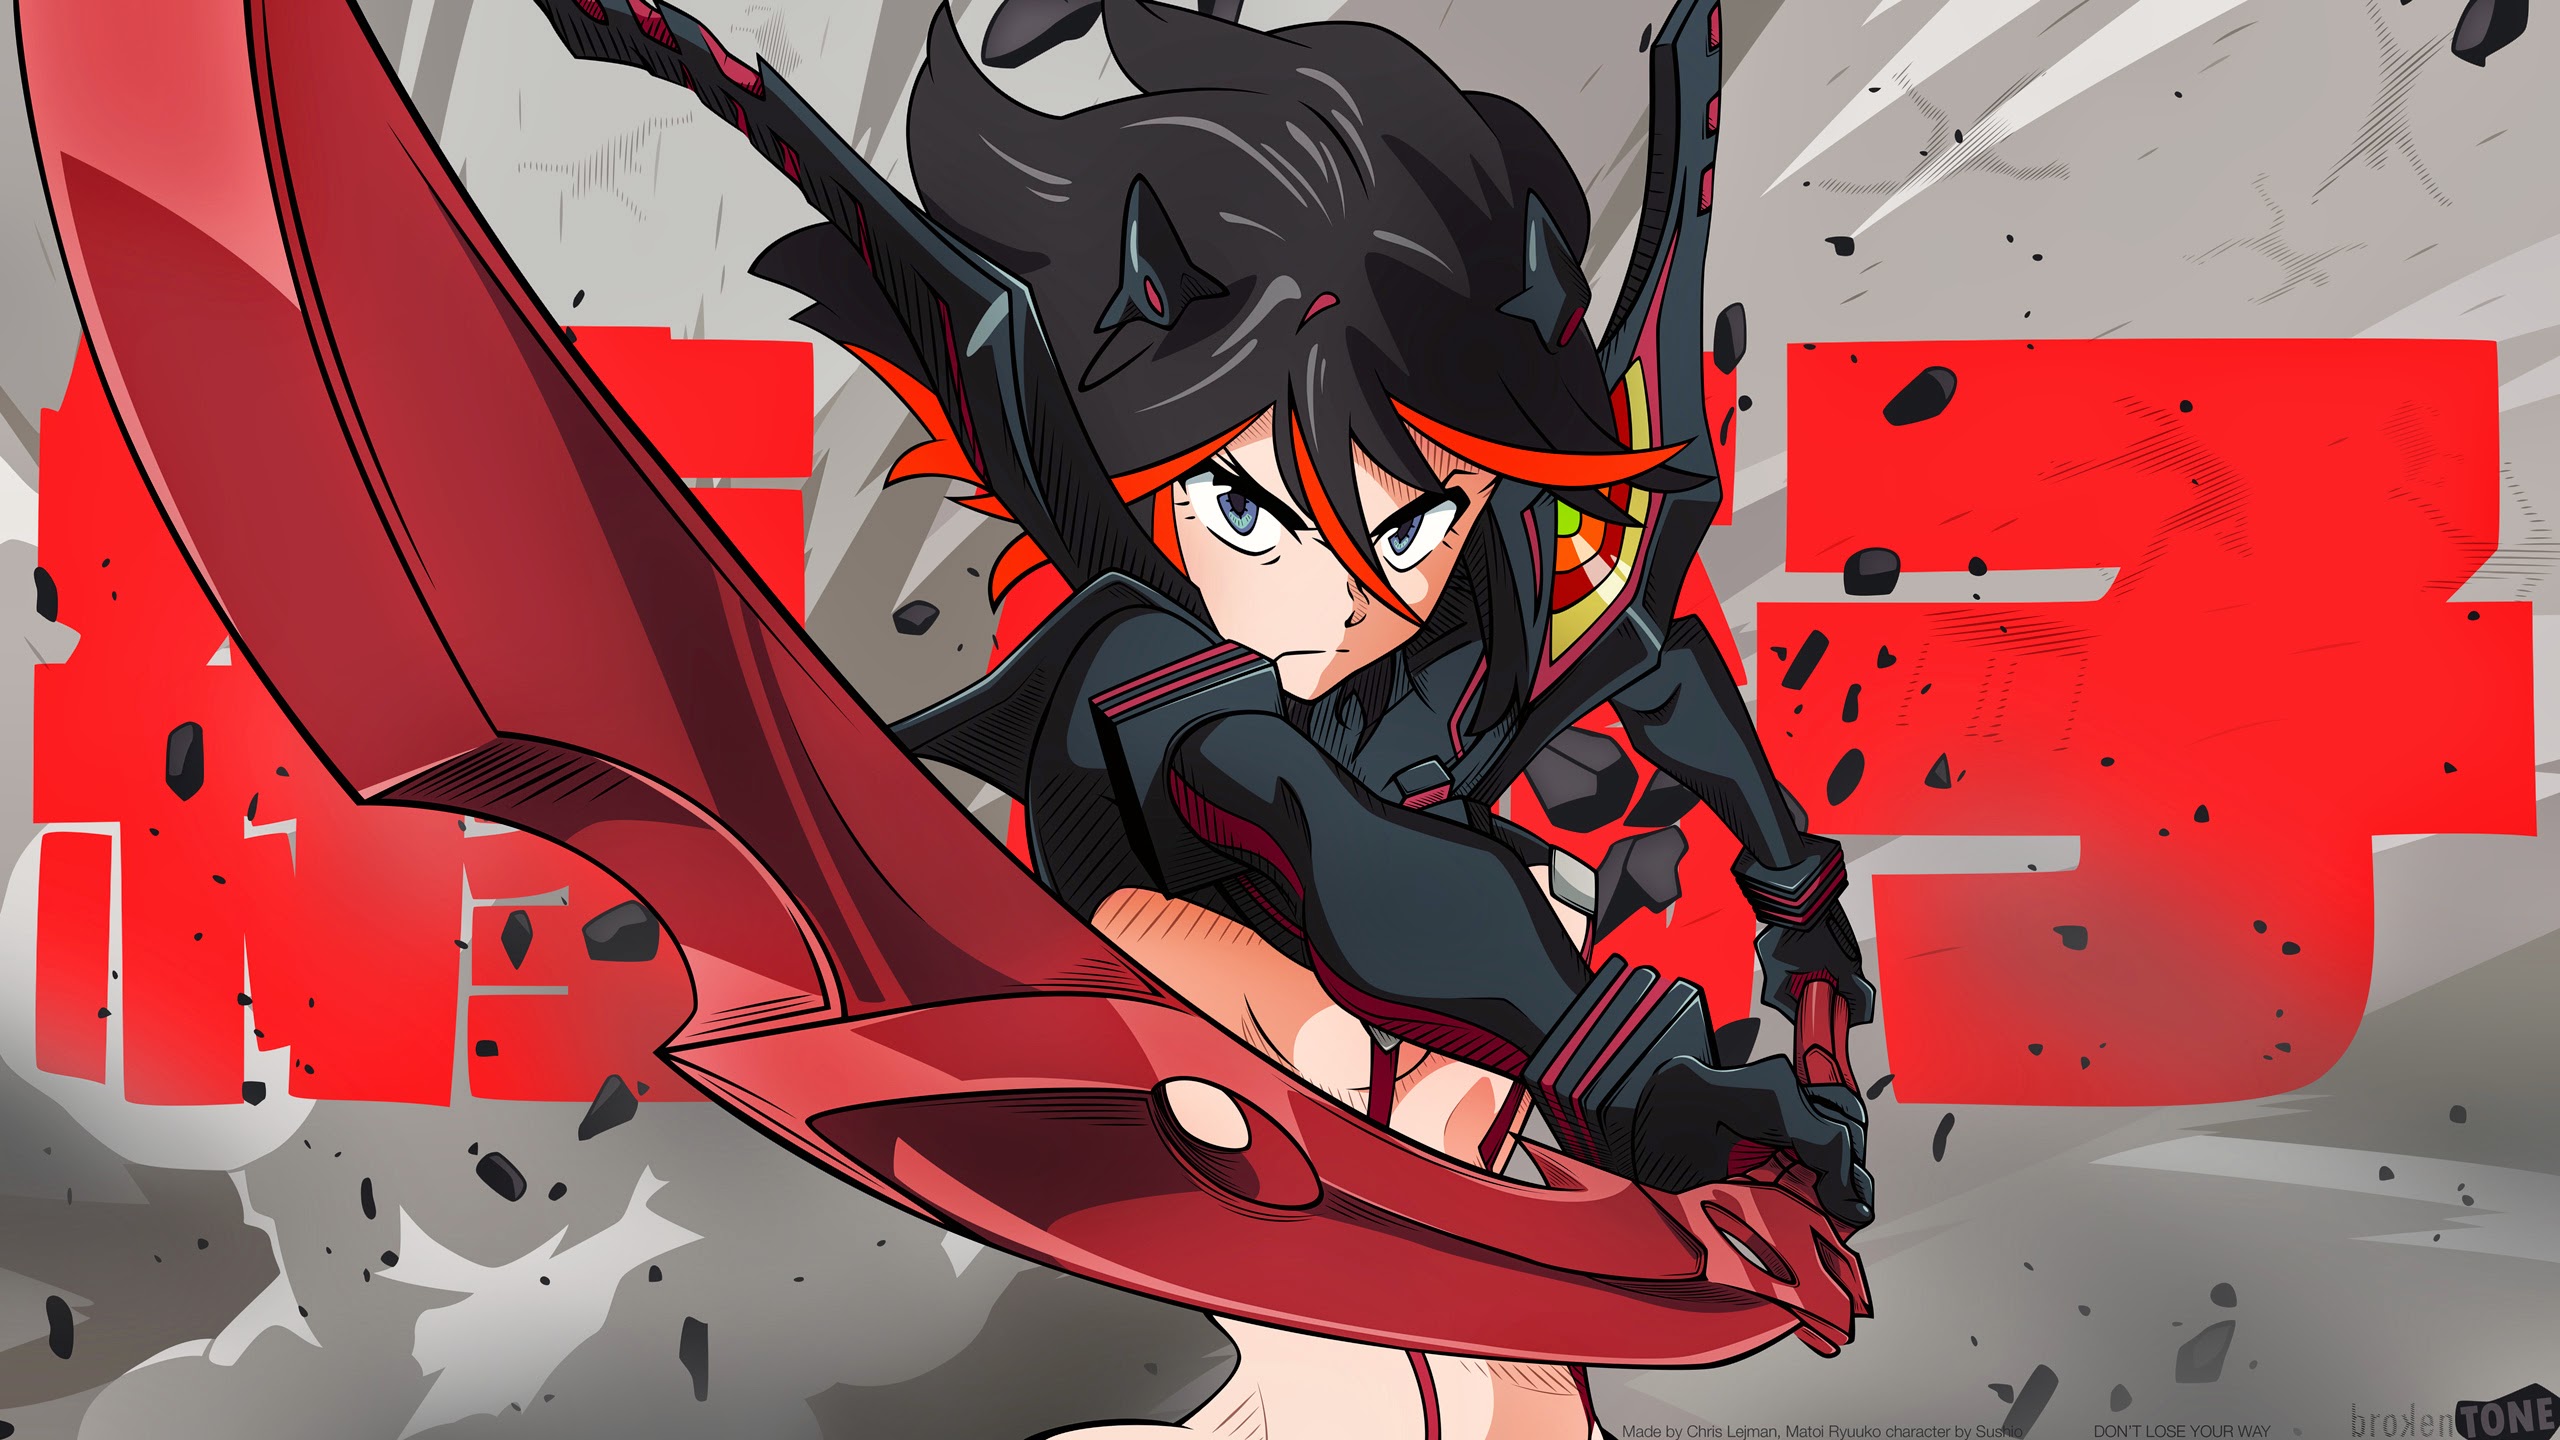 wallpaper hd anime xbox Kill la anime wallpaper xbox wallpapers backgrounds ryuko arc trigger works studio system fan service series matoi cosplay launched countdown